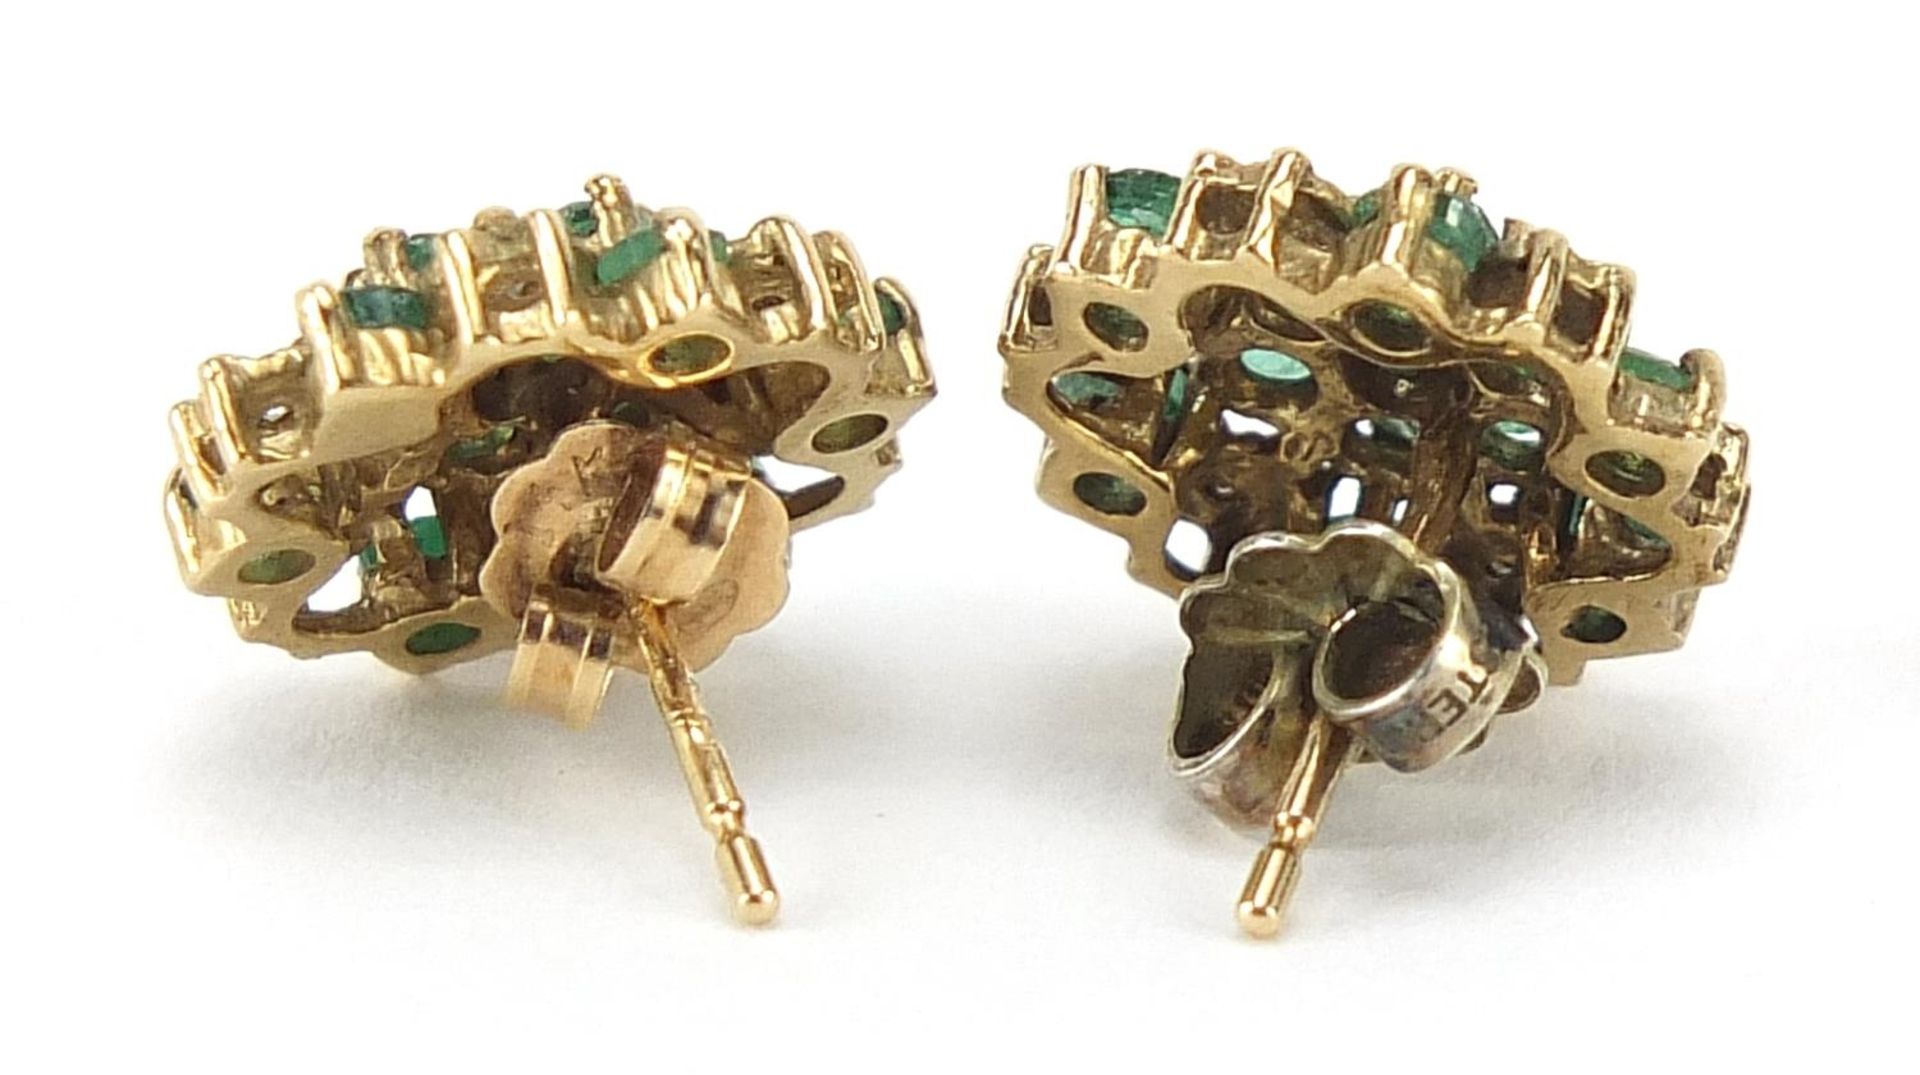 Pair of 9ct gold emerald and diamond cluster stud earrings, 1.2cm in diameter, 2.4g - Image 3 of 3